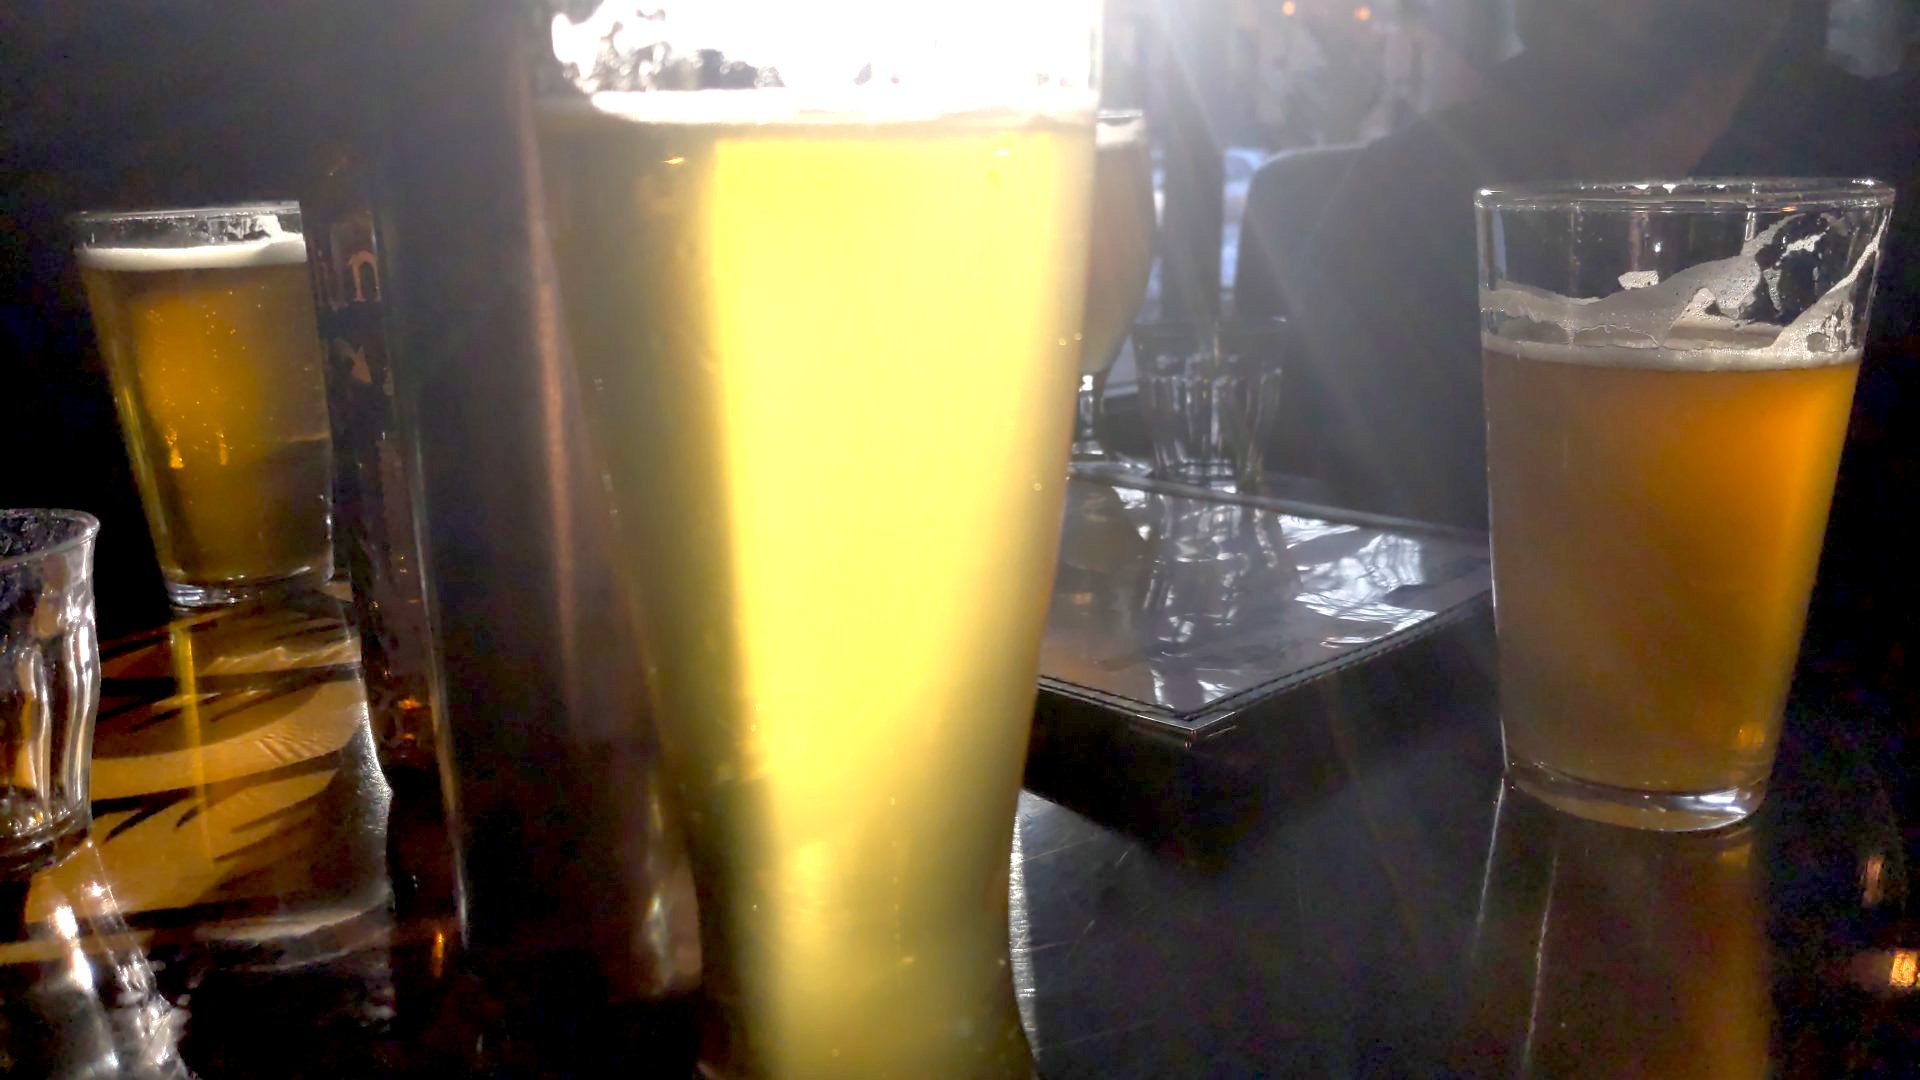 A glass of beer illuminated by sunlight